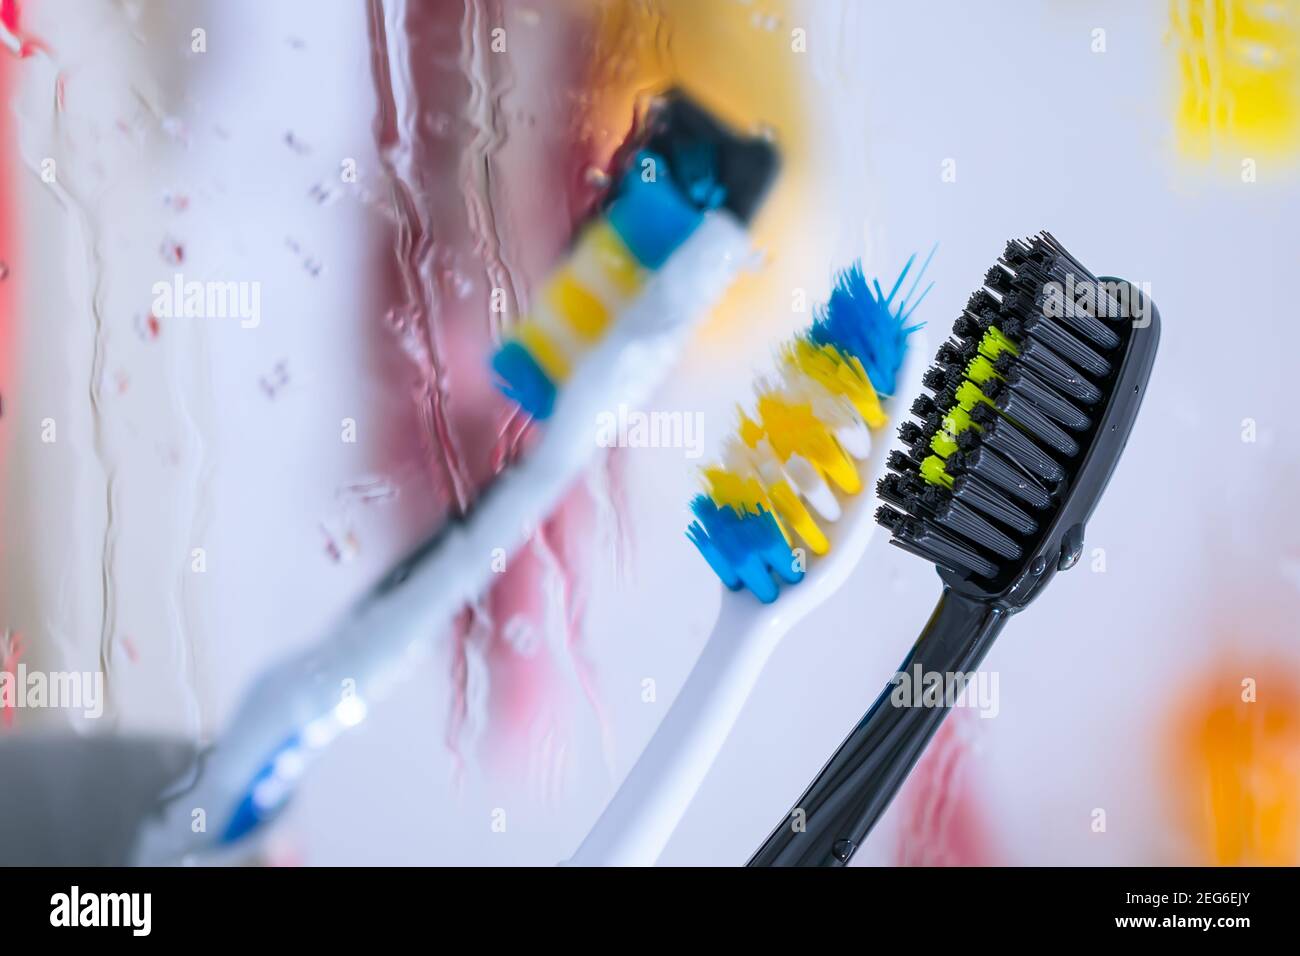 Black toothbrush in the bathroom for brushing teeth and personal hygiene Stock Photo